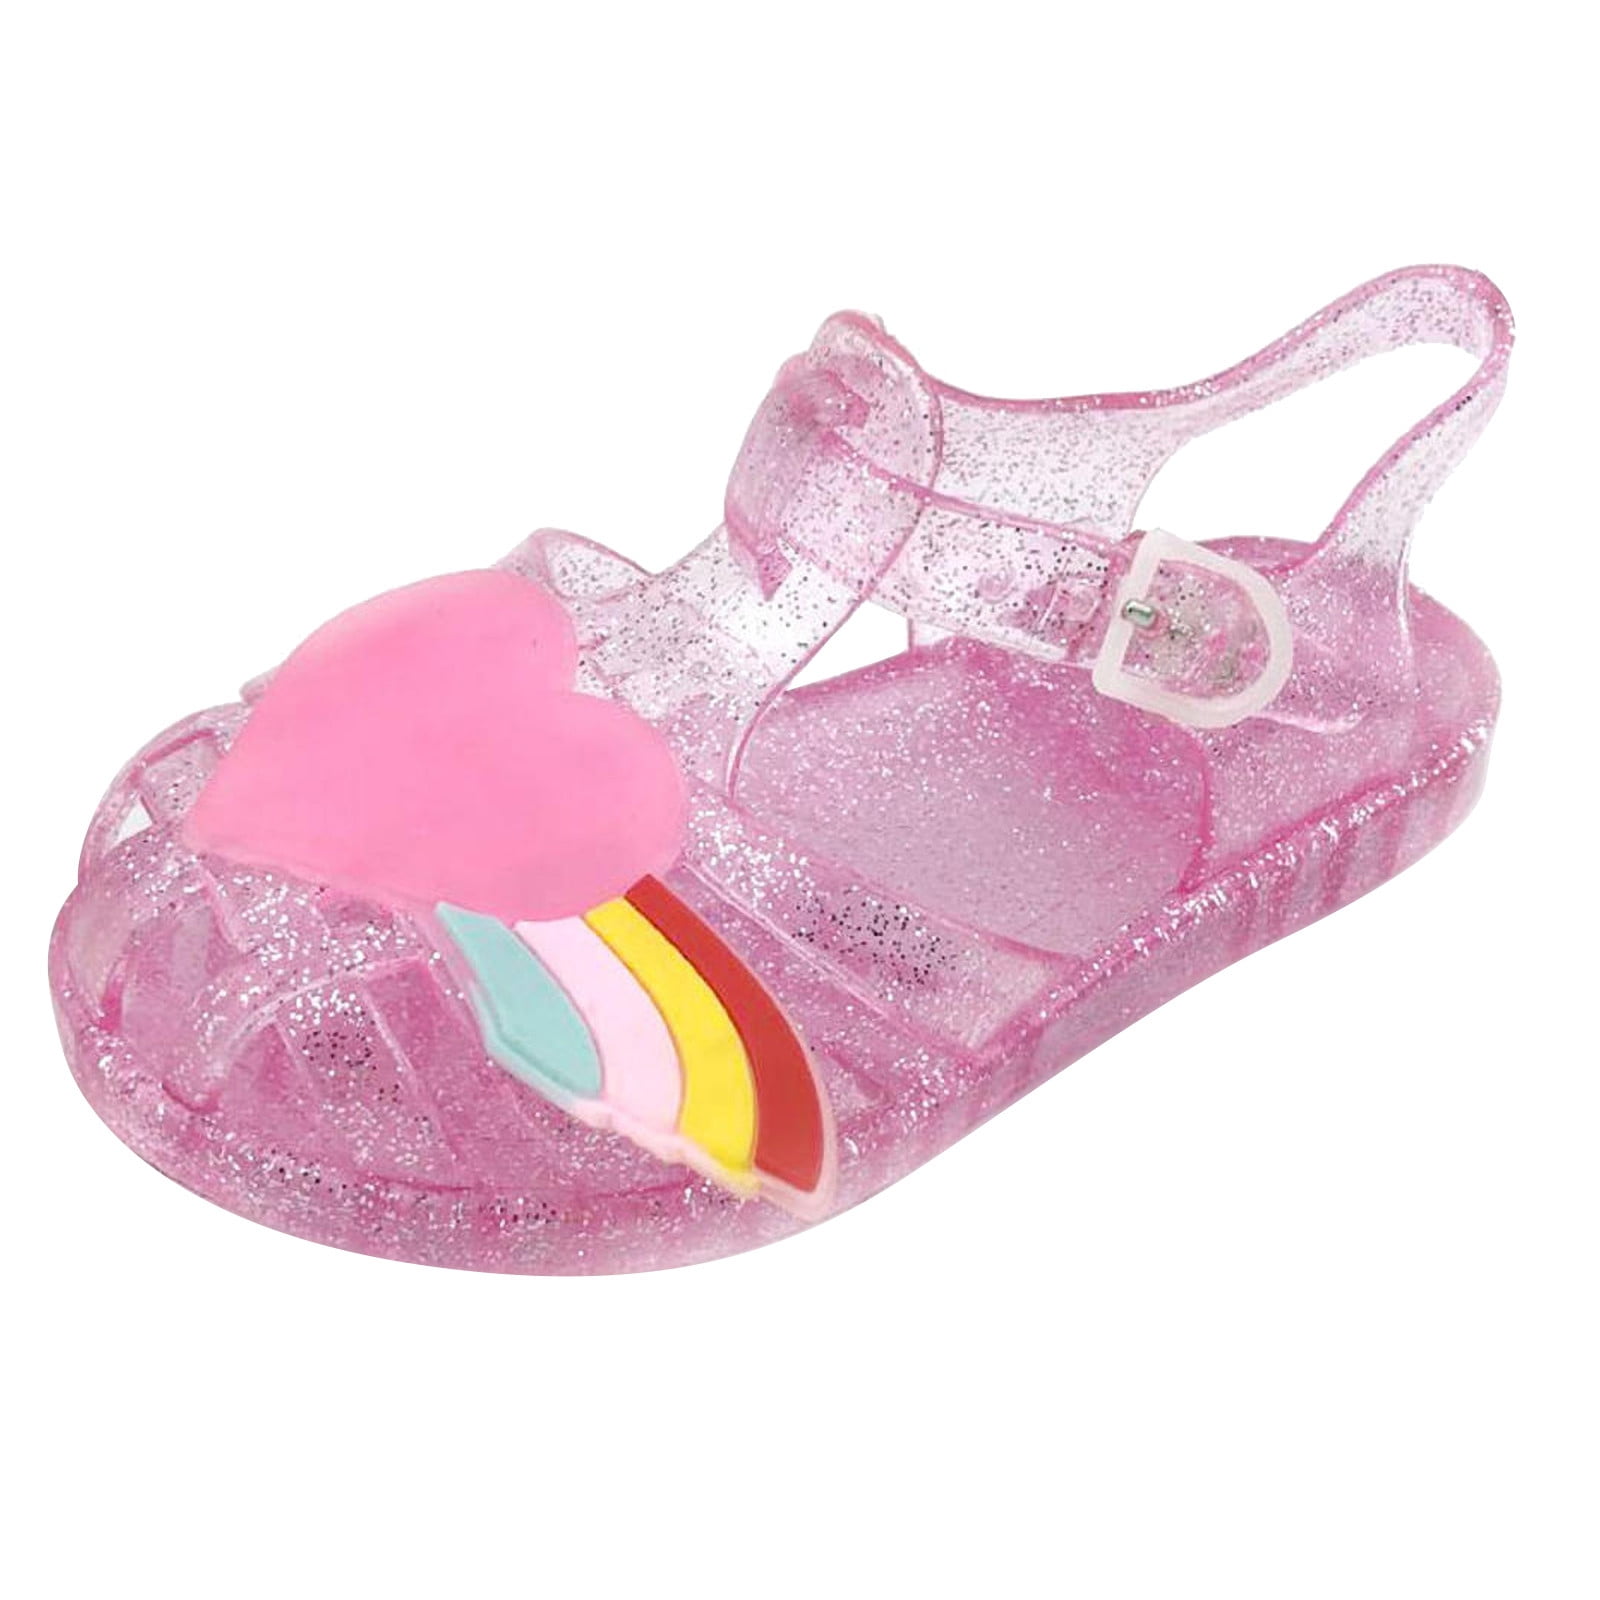 5 Years Summer Sandals For Little Girls Toddler Shoes Baby Girls Cute ...